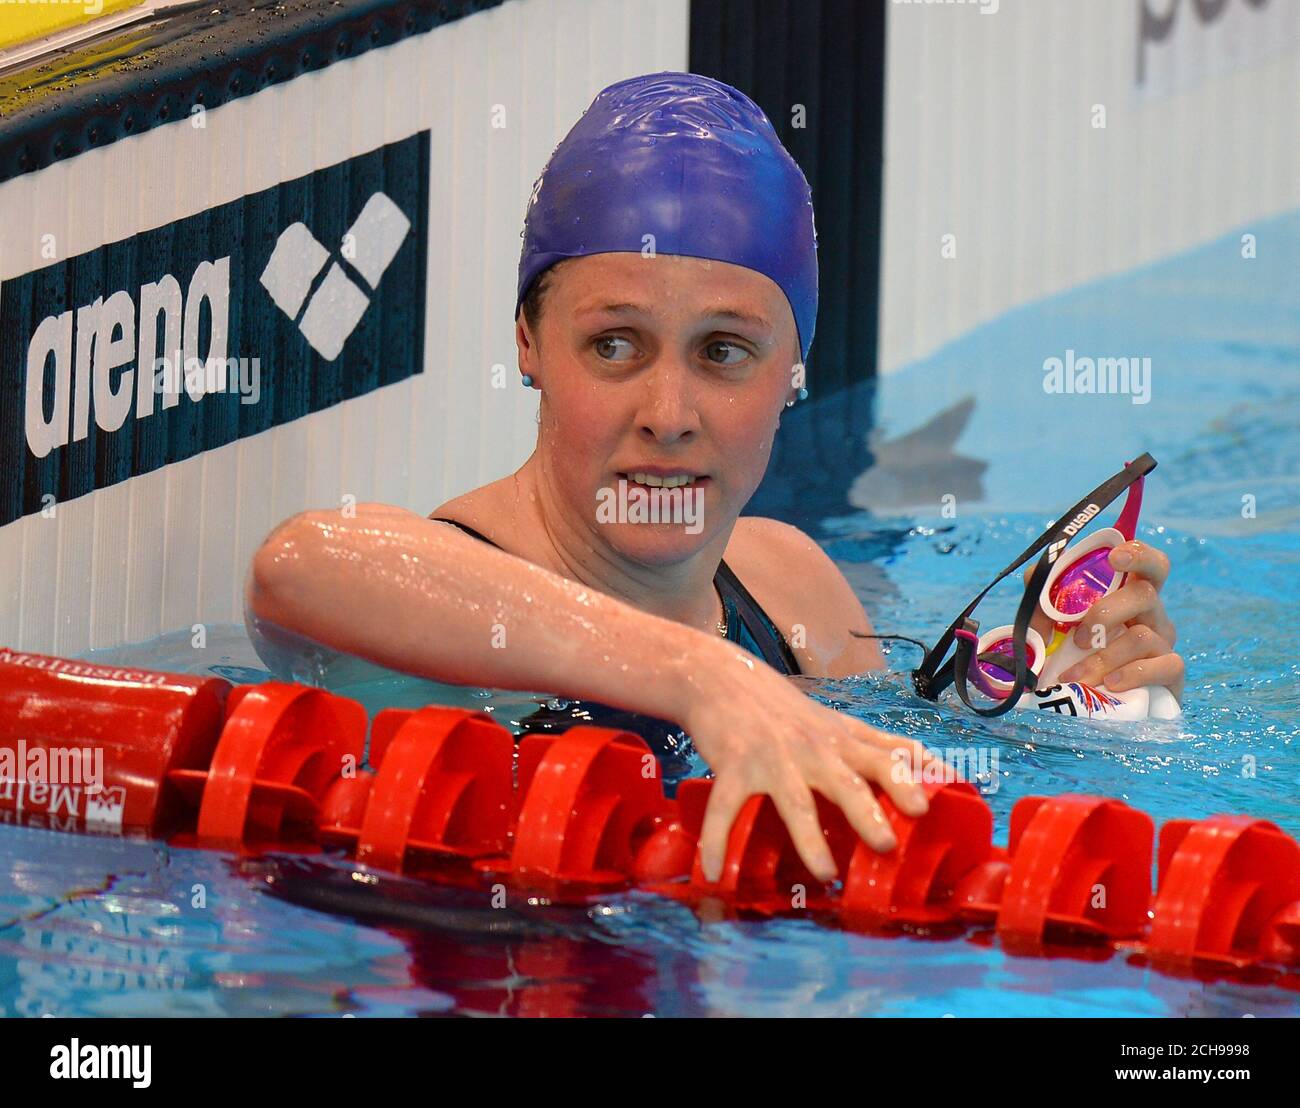 Great Britain's Hannah Miley after finishing her Women's 200m Medley Semi-Final during day ten of the European Aquatics Championships at the London Aquatics Centre, Stratford. Stock Photo